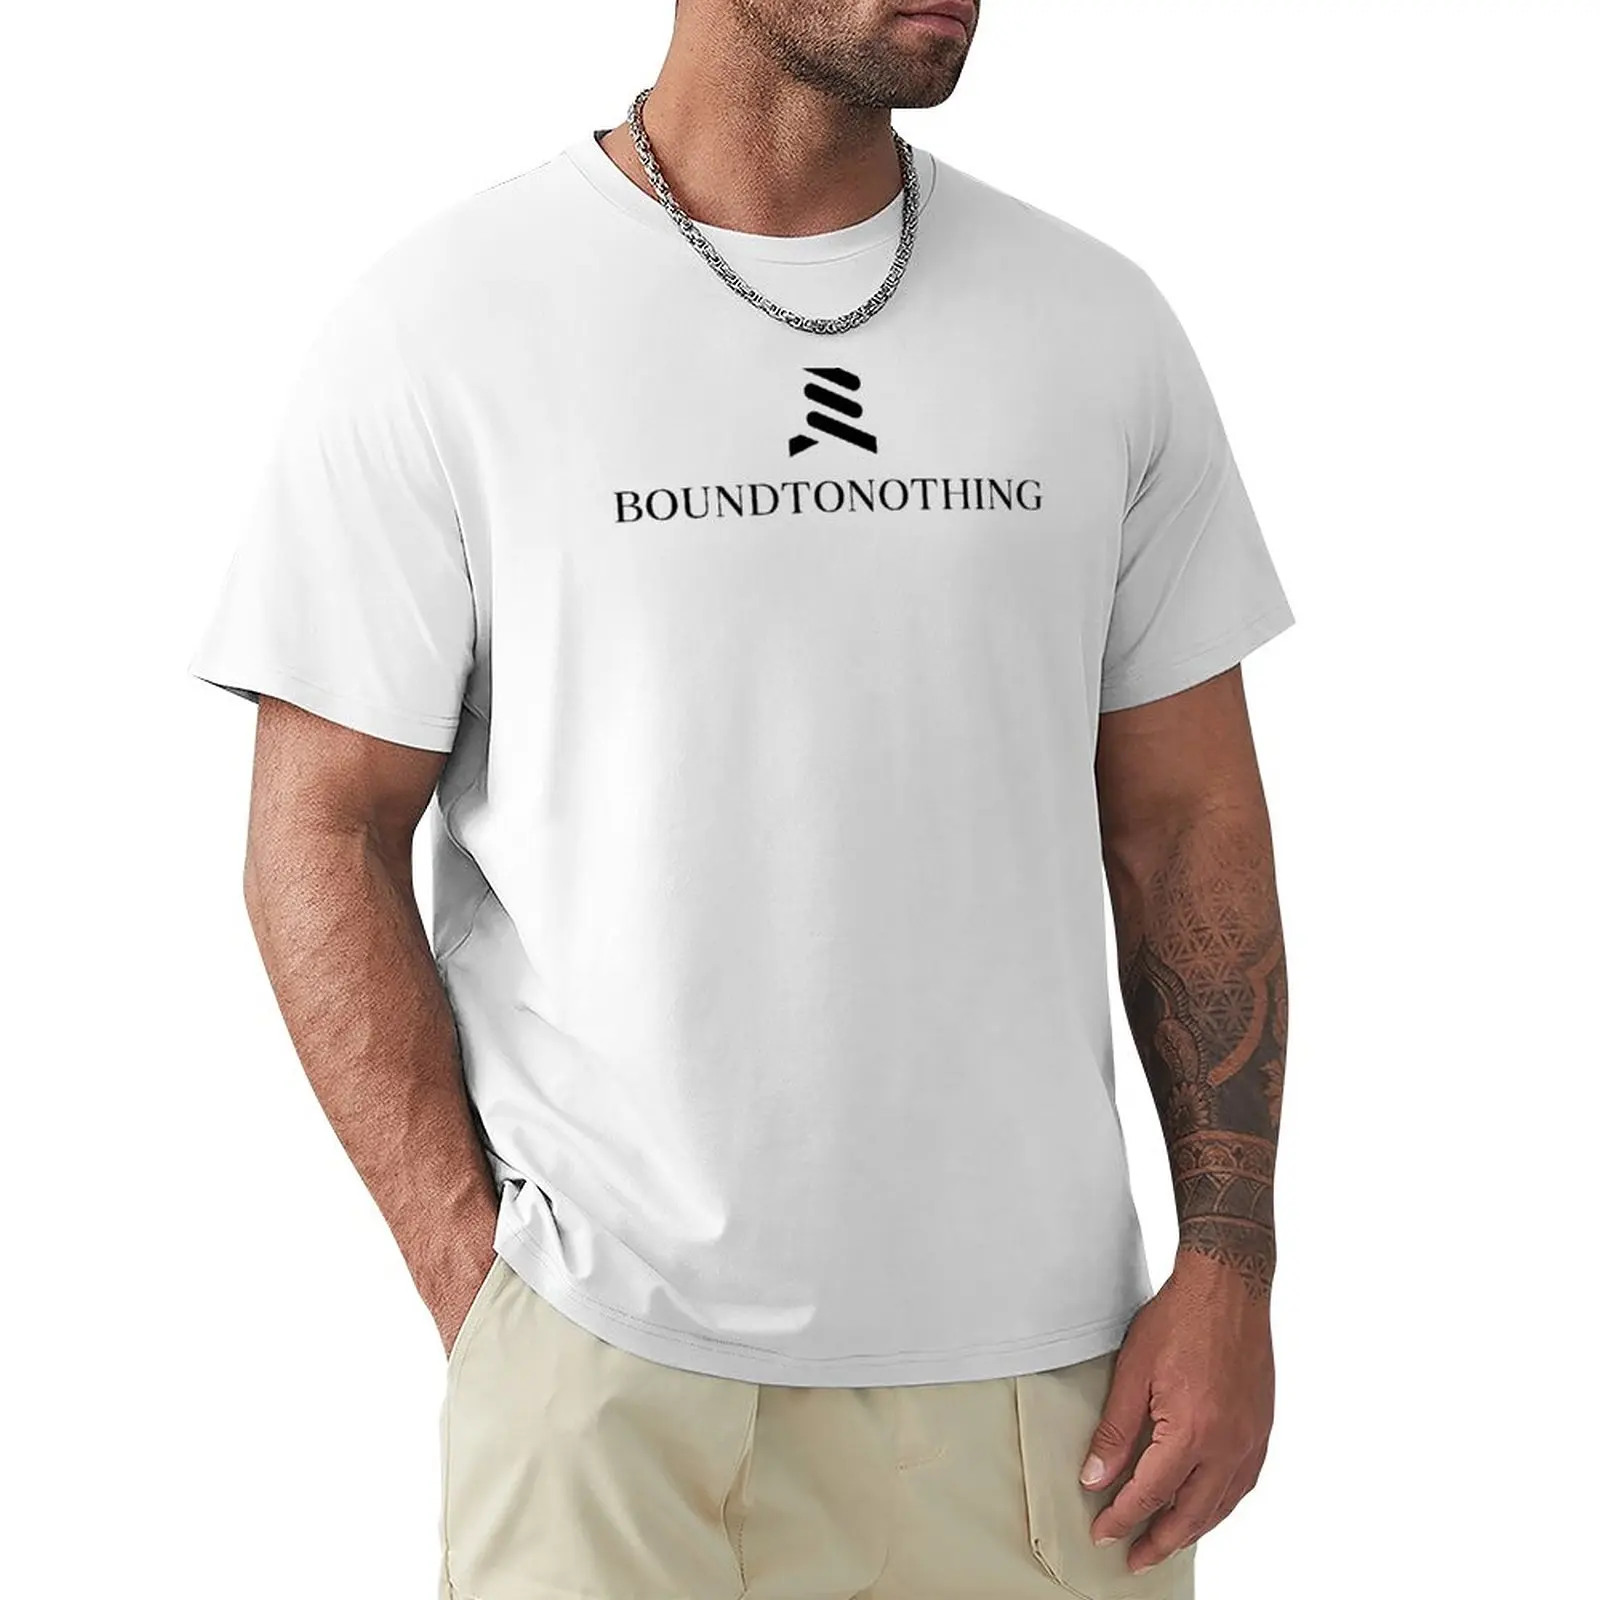 BoundToNothing T-Shirt sublime aesthetic clothes graphics t shirts for men graphic graphic t shirts may not perfect but jesus says to die for t shirt clothes women plus size cute aesthetic clothes man clothing